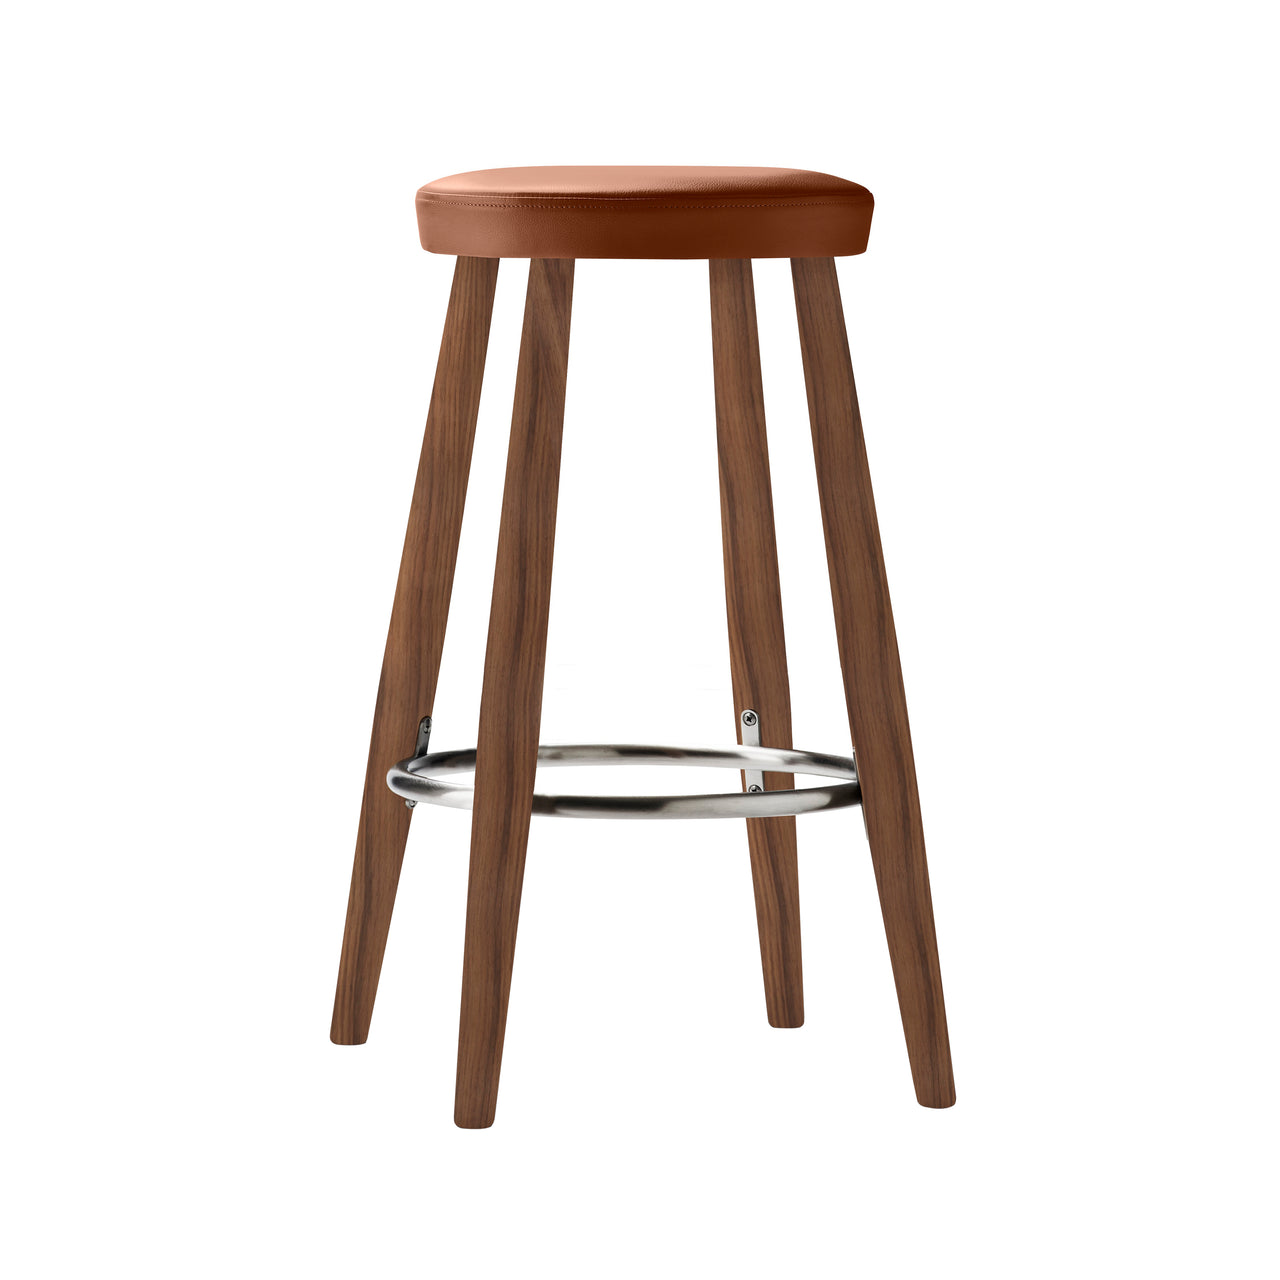 CH56 Bar + CH58 Counter Stool: Counter + Oiled Walnut